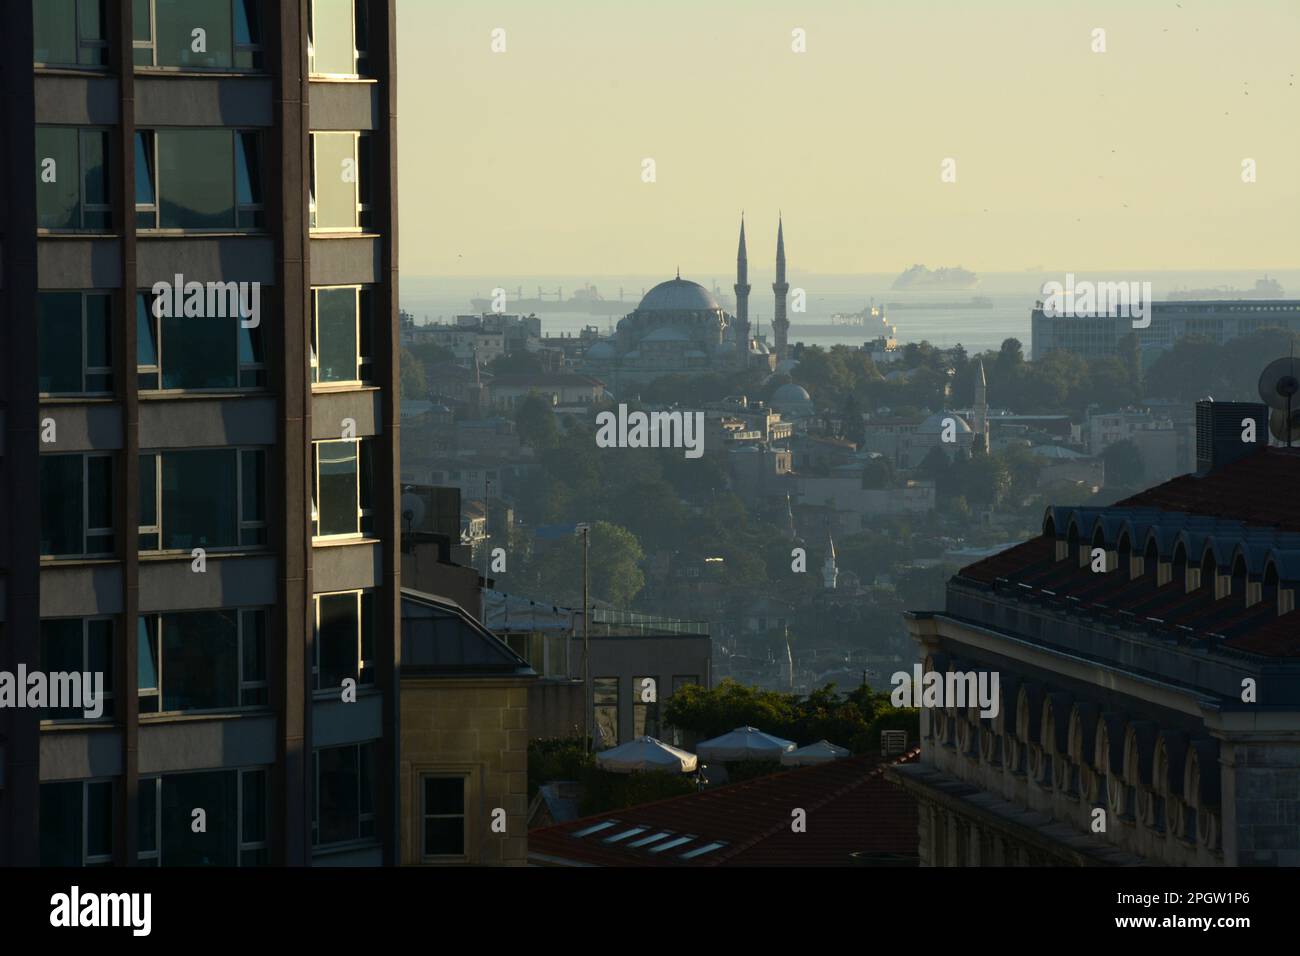 Looking towards Sultanahmet and the ships on the Sea of Marmara from Beyoglu on the European side of Istanbul at sunset, Turkey / Turkiye. Stock Photo